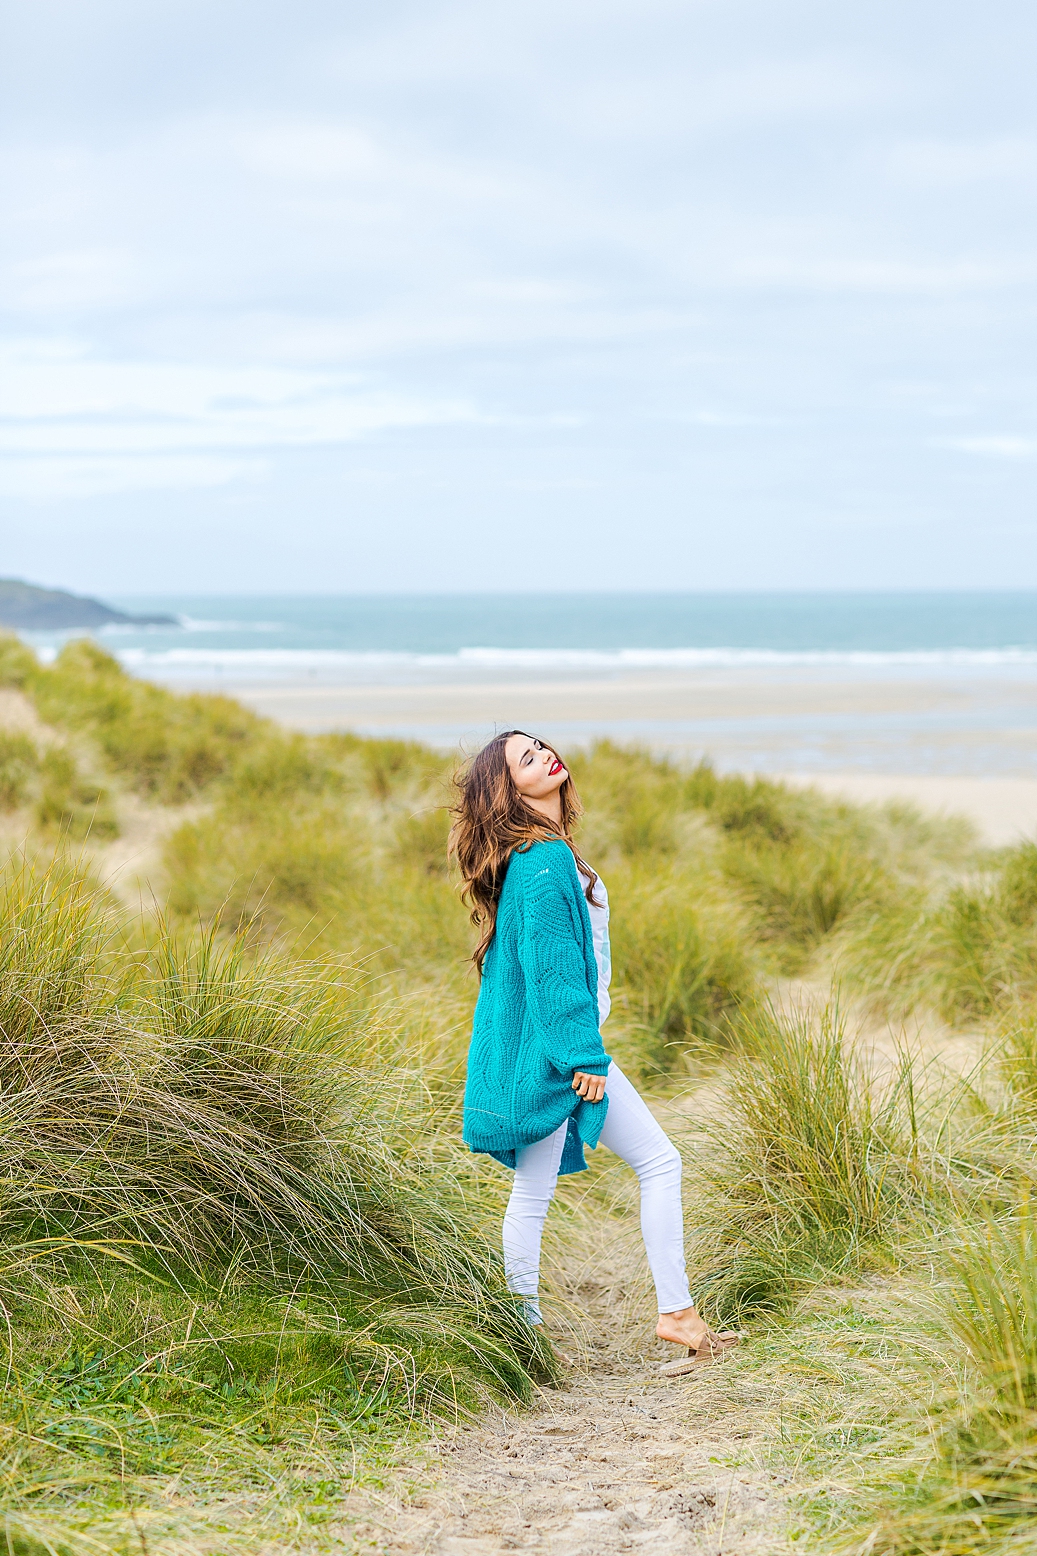 Colourful lifestyle photography in Cornwall by Marianne Taylor.